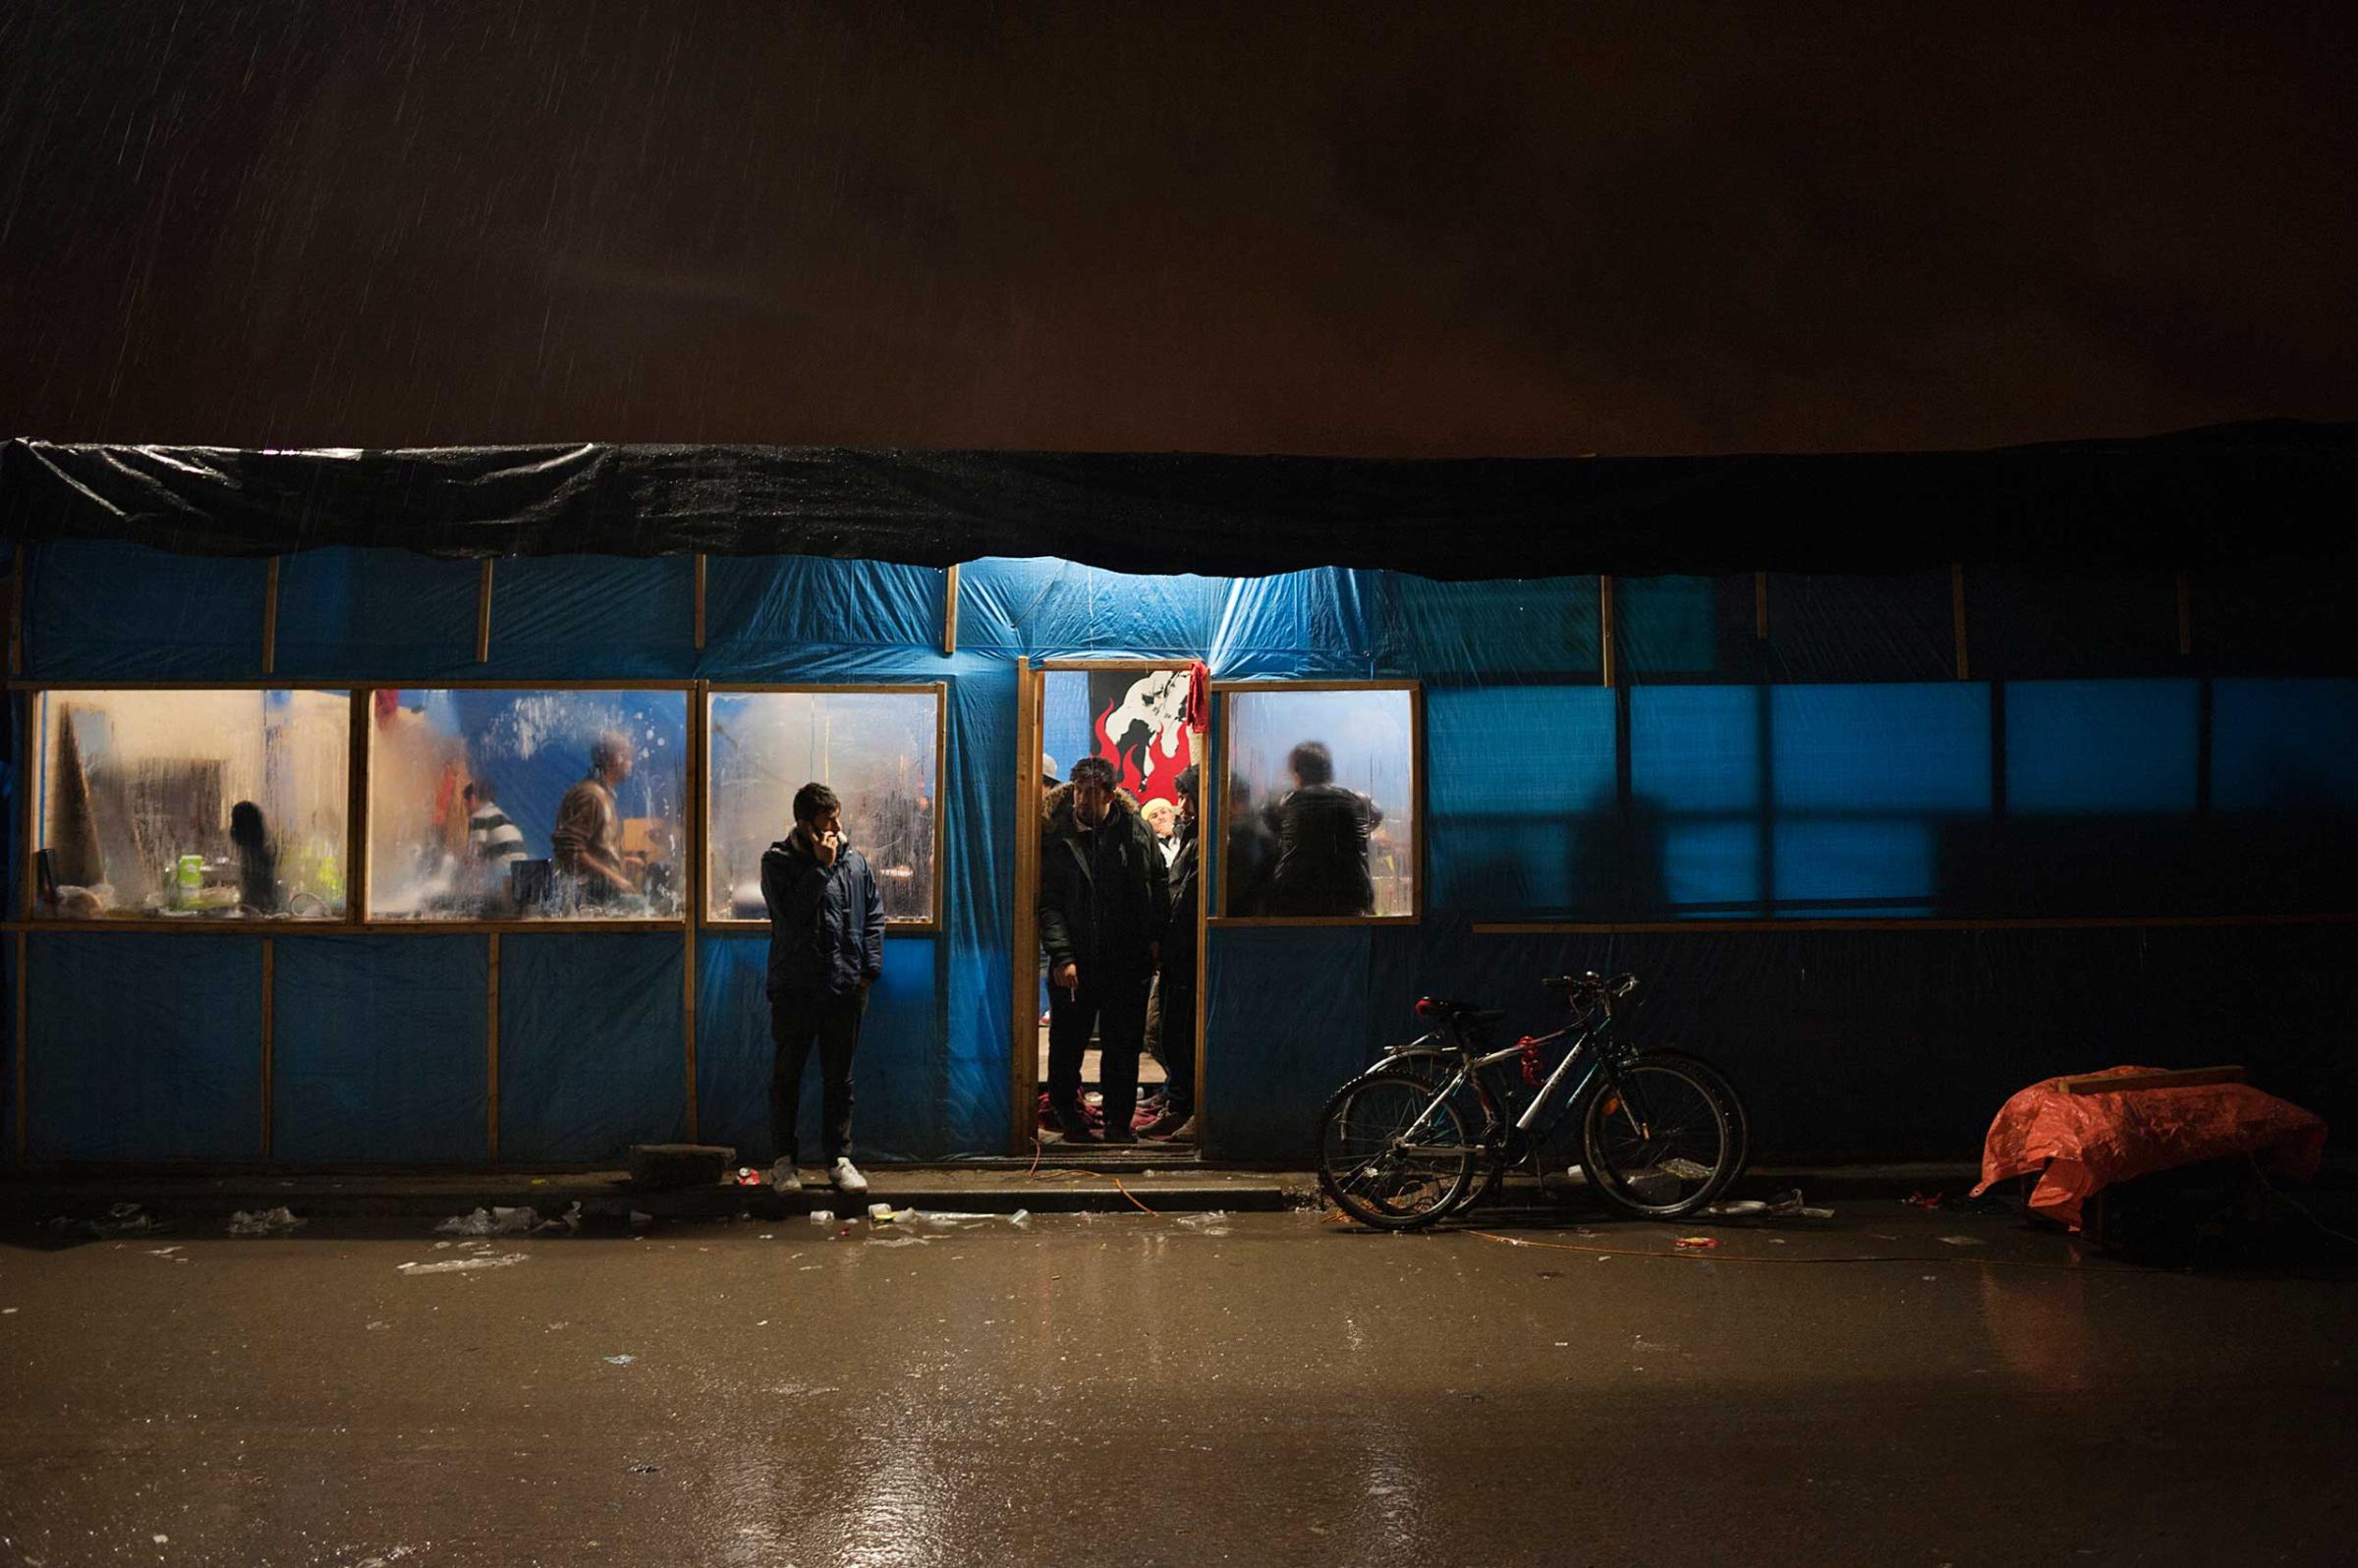 Sheltering from the rain in an Afghan restaurant in Calais, France on Nov. 4, 2015.